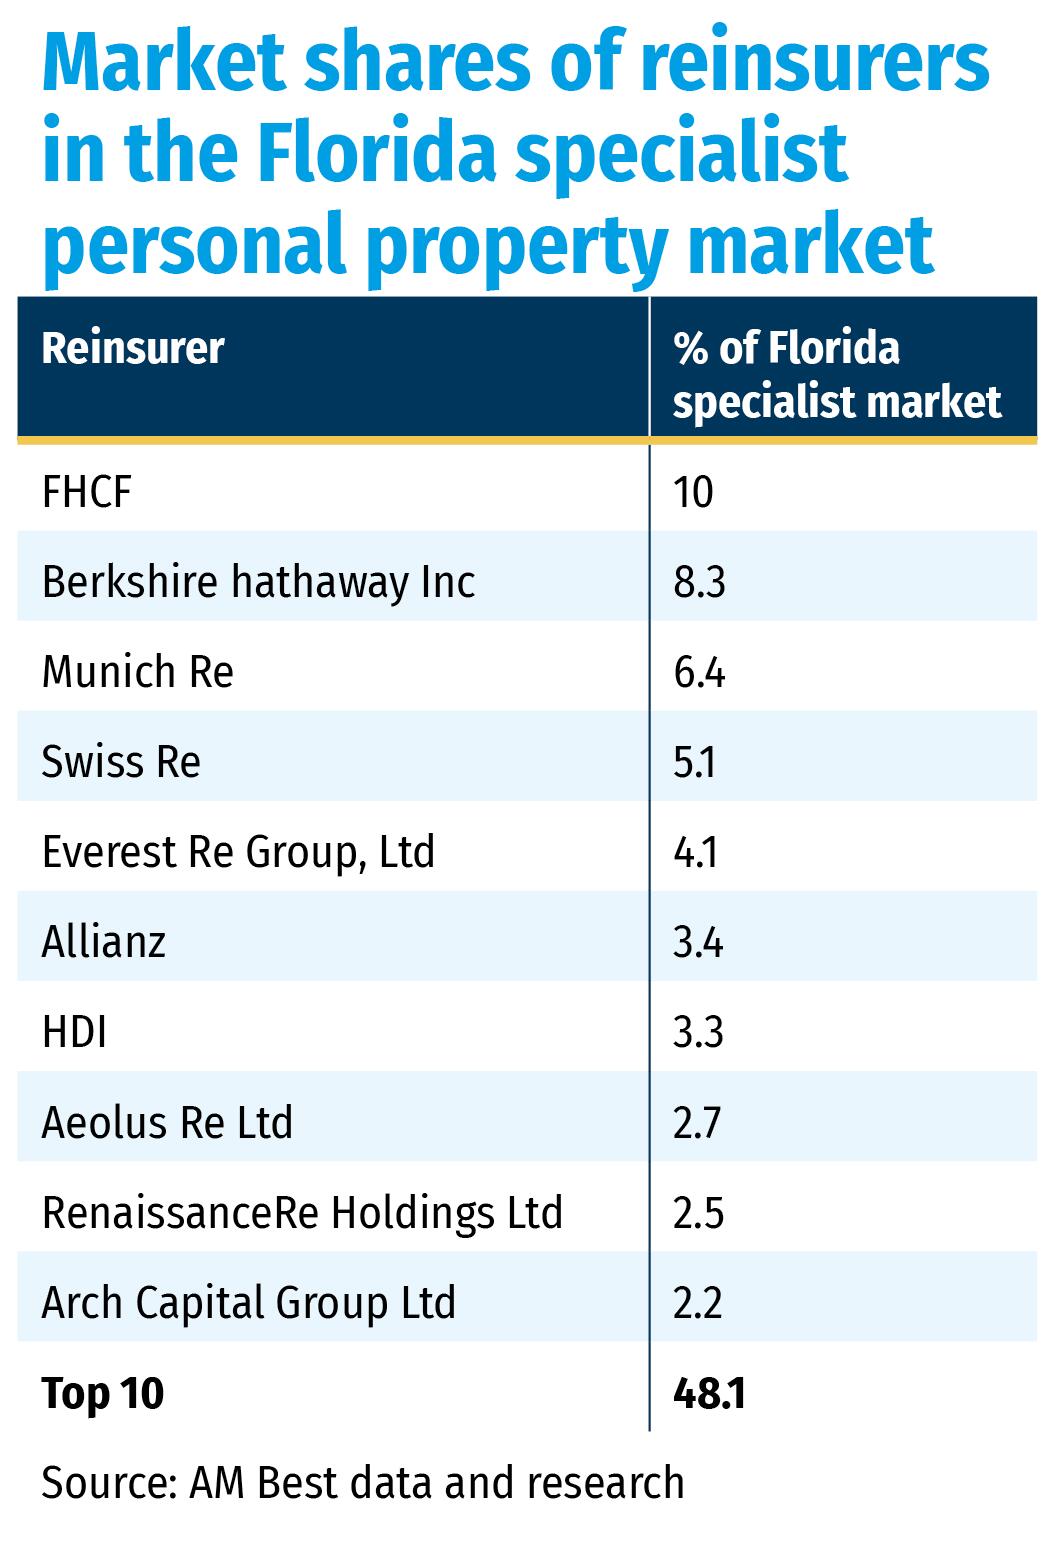 Market shares of reinsurers in the Florida specialist personal property market